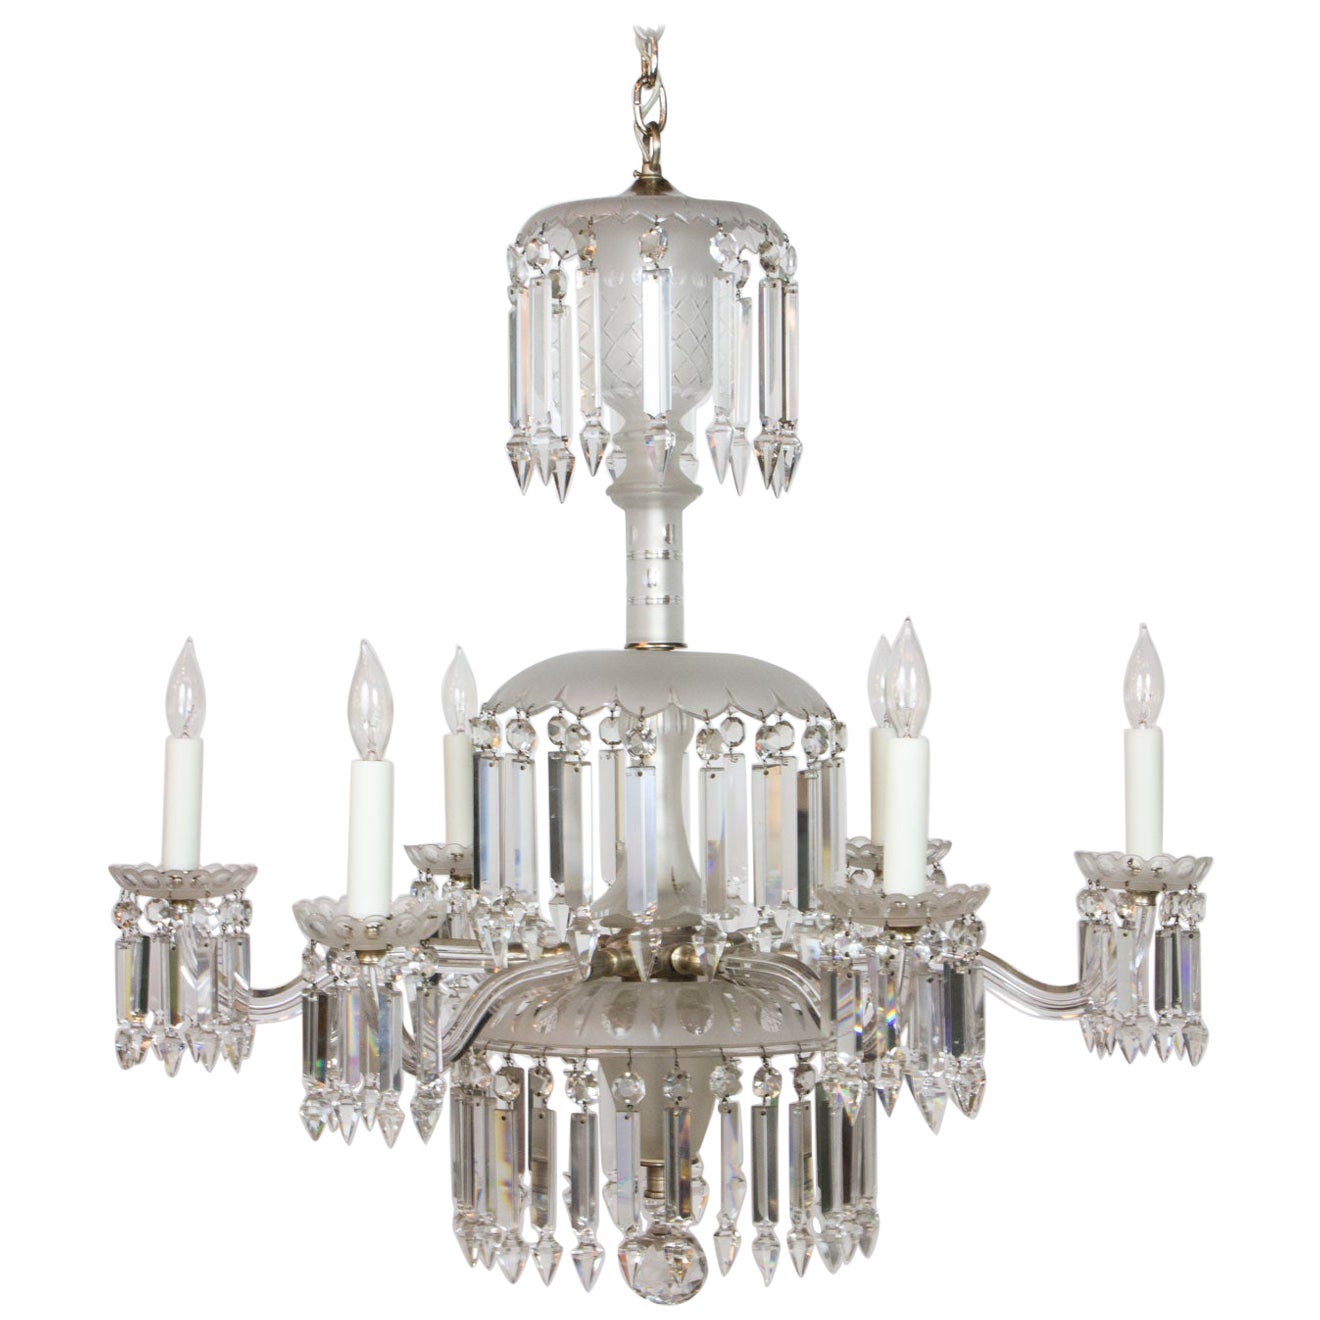 19th Century 6 Arm Frosted Crystal Gasolier